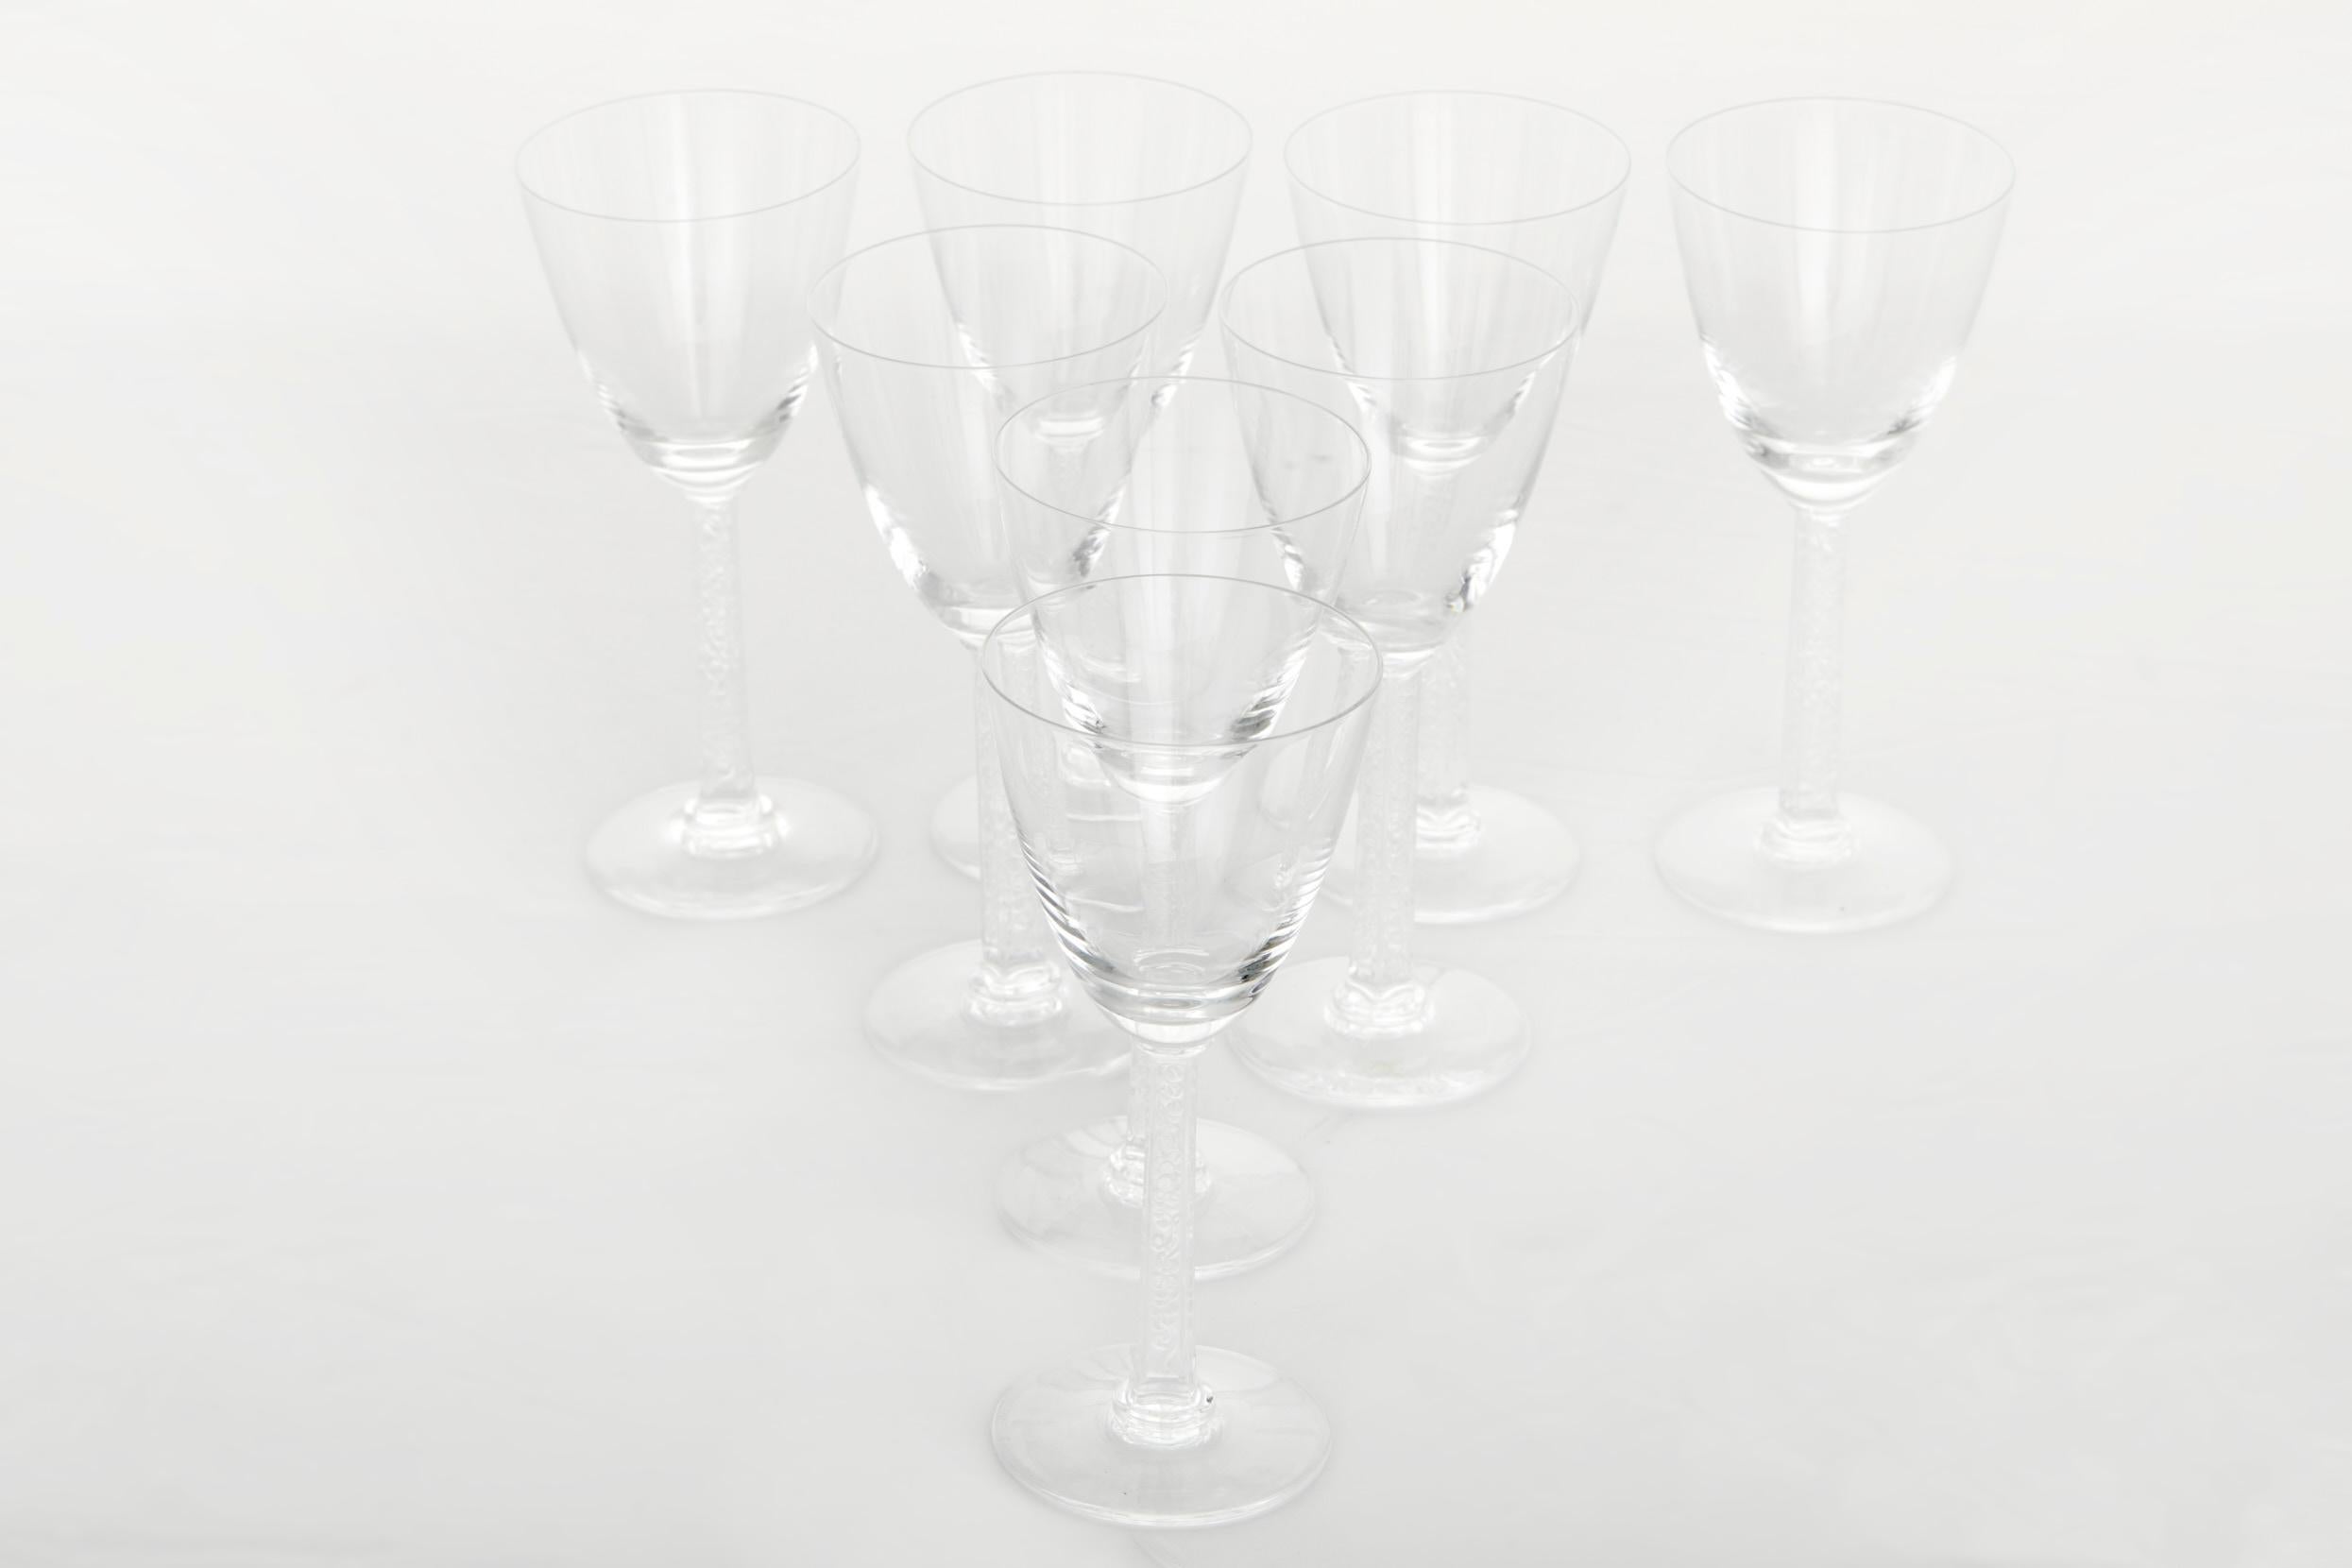 20th Century Lalique crystal tableware / barware service for ten people . Each glass is in great condition . Minor wear consistent with age / use . Maker's mark undersigned . Each glass measures 6 1/2 inches tall X 3 inches diameter.